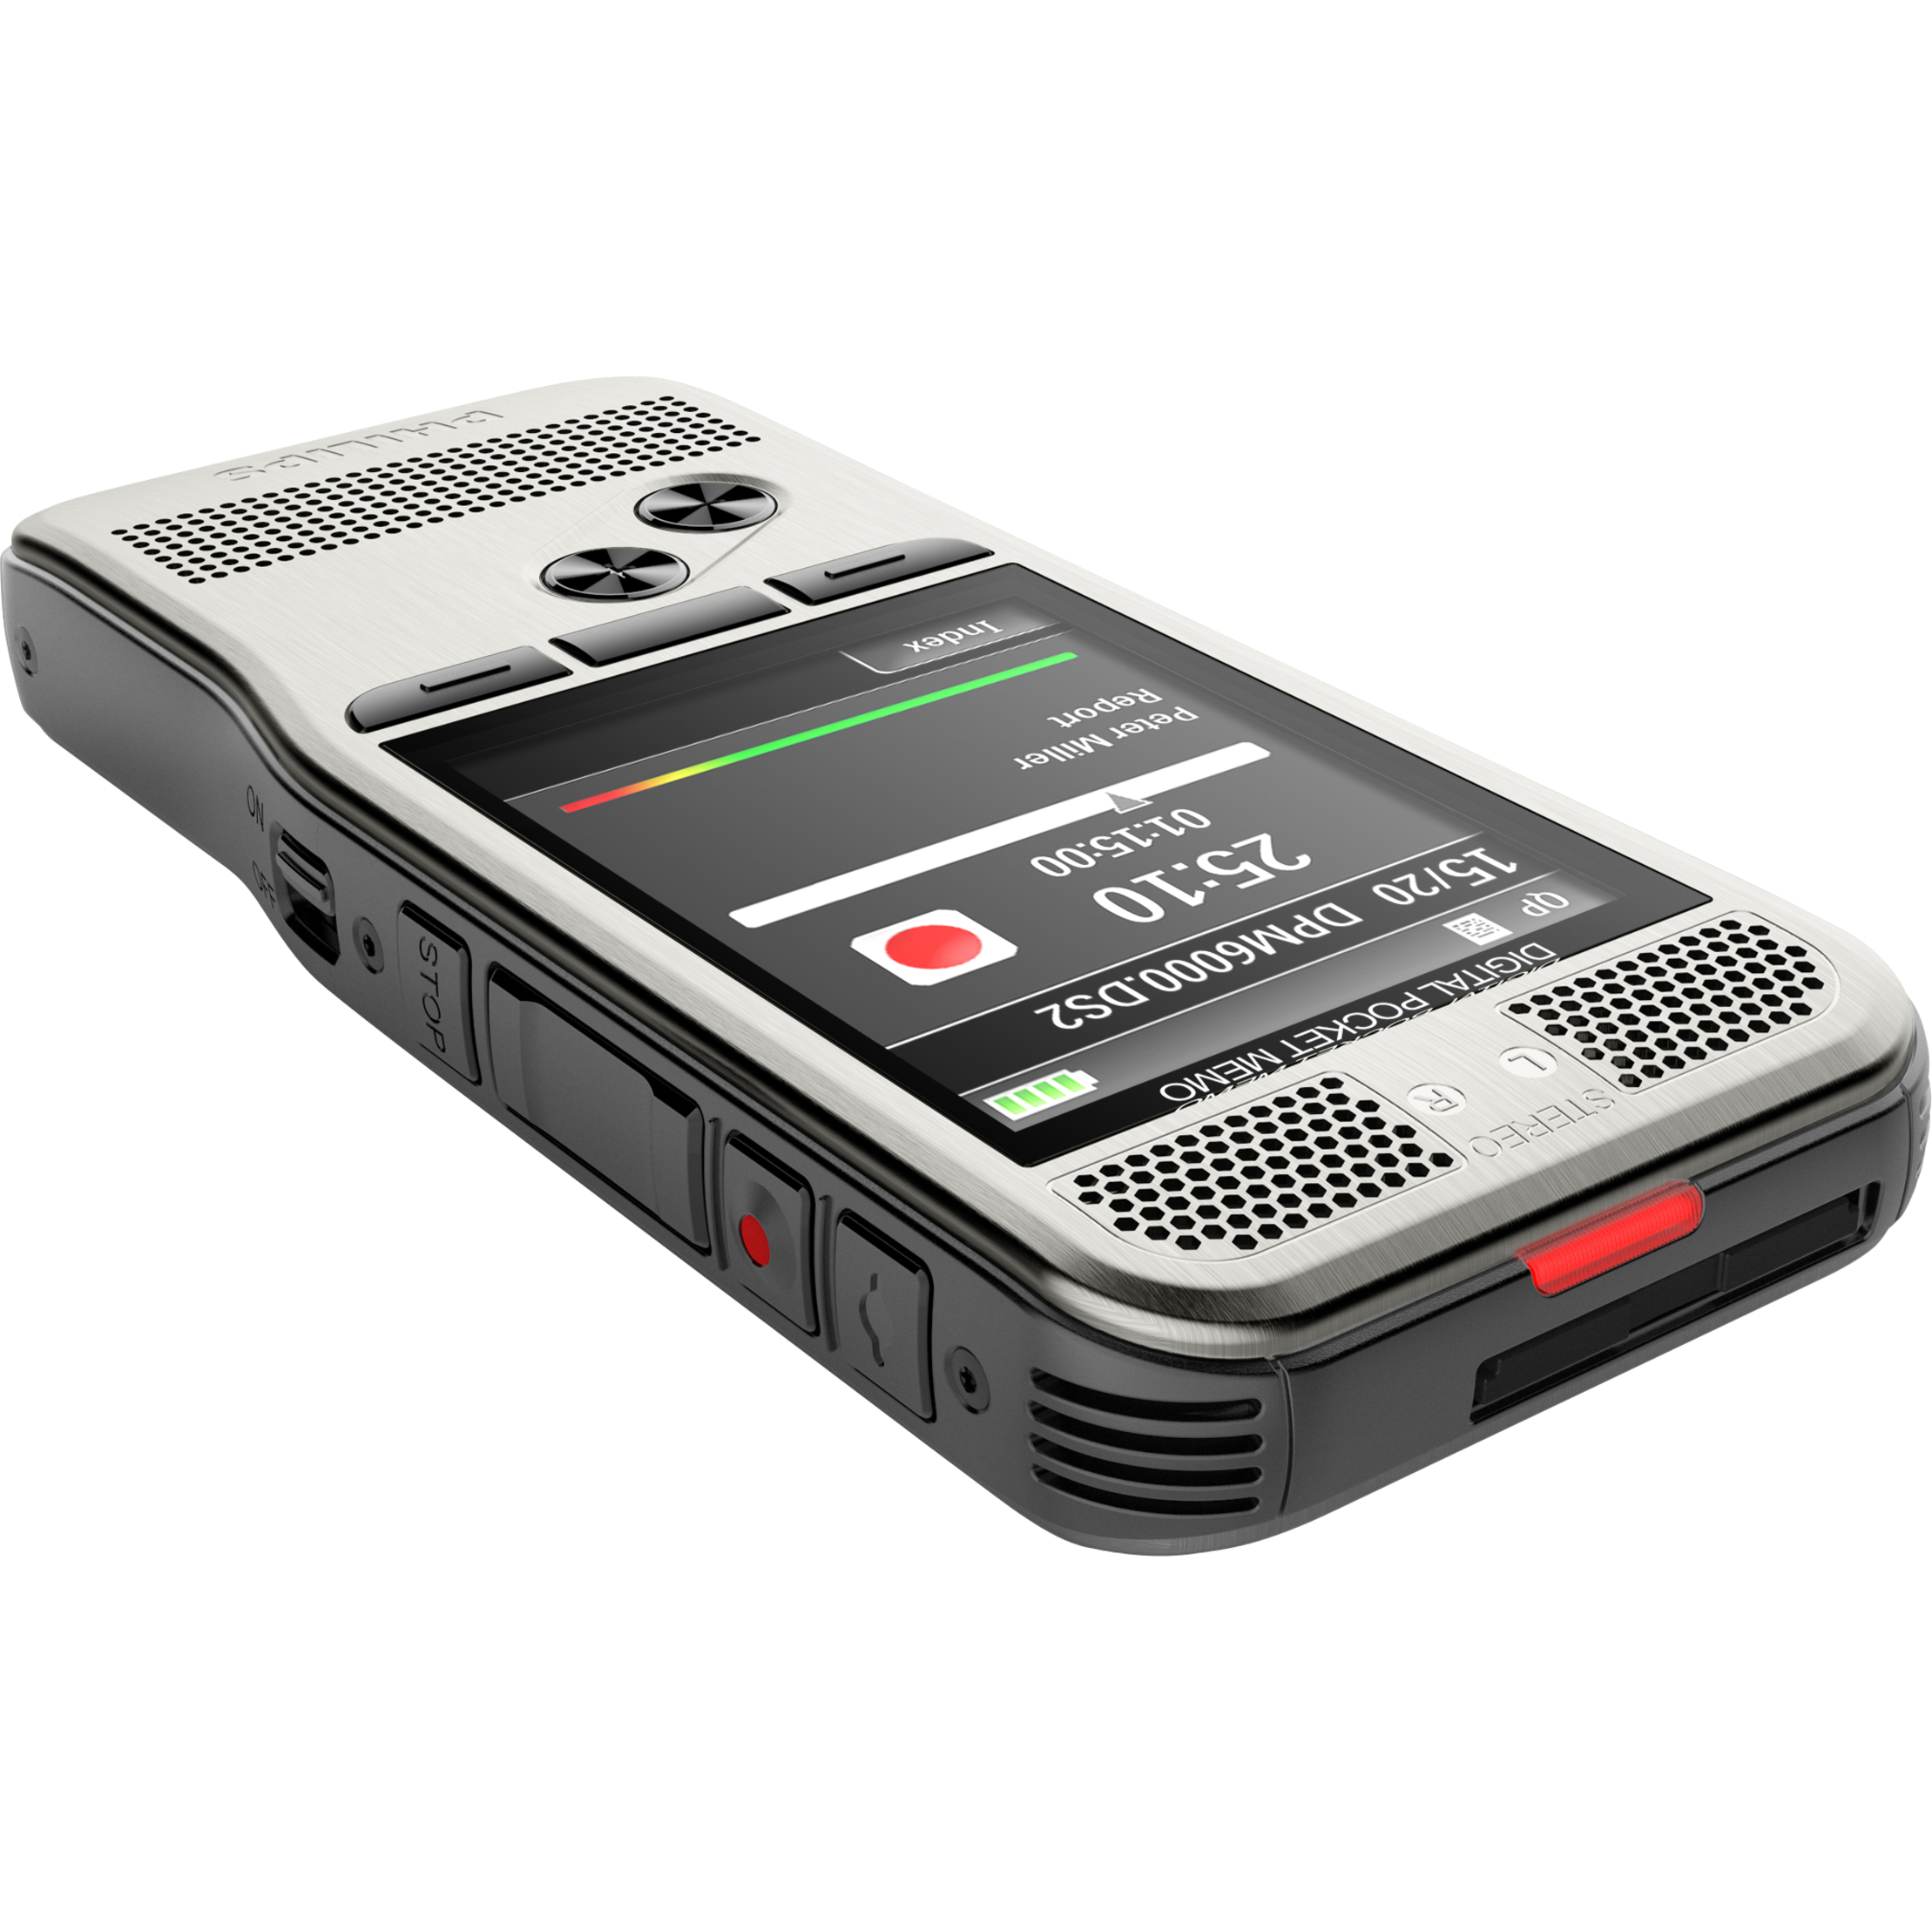 Philips Pocket Memo Digital Voice Recorder with LCD Display, DPM6000 - image 3 of 7